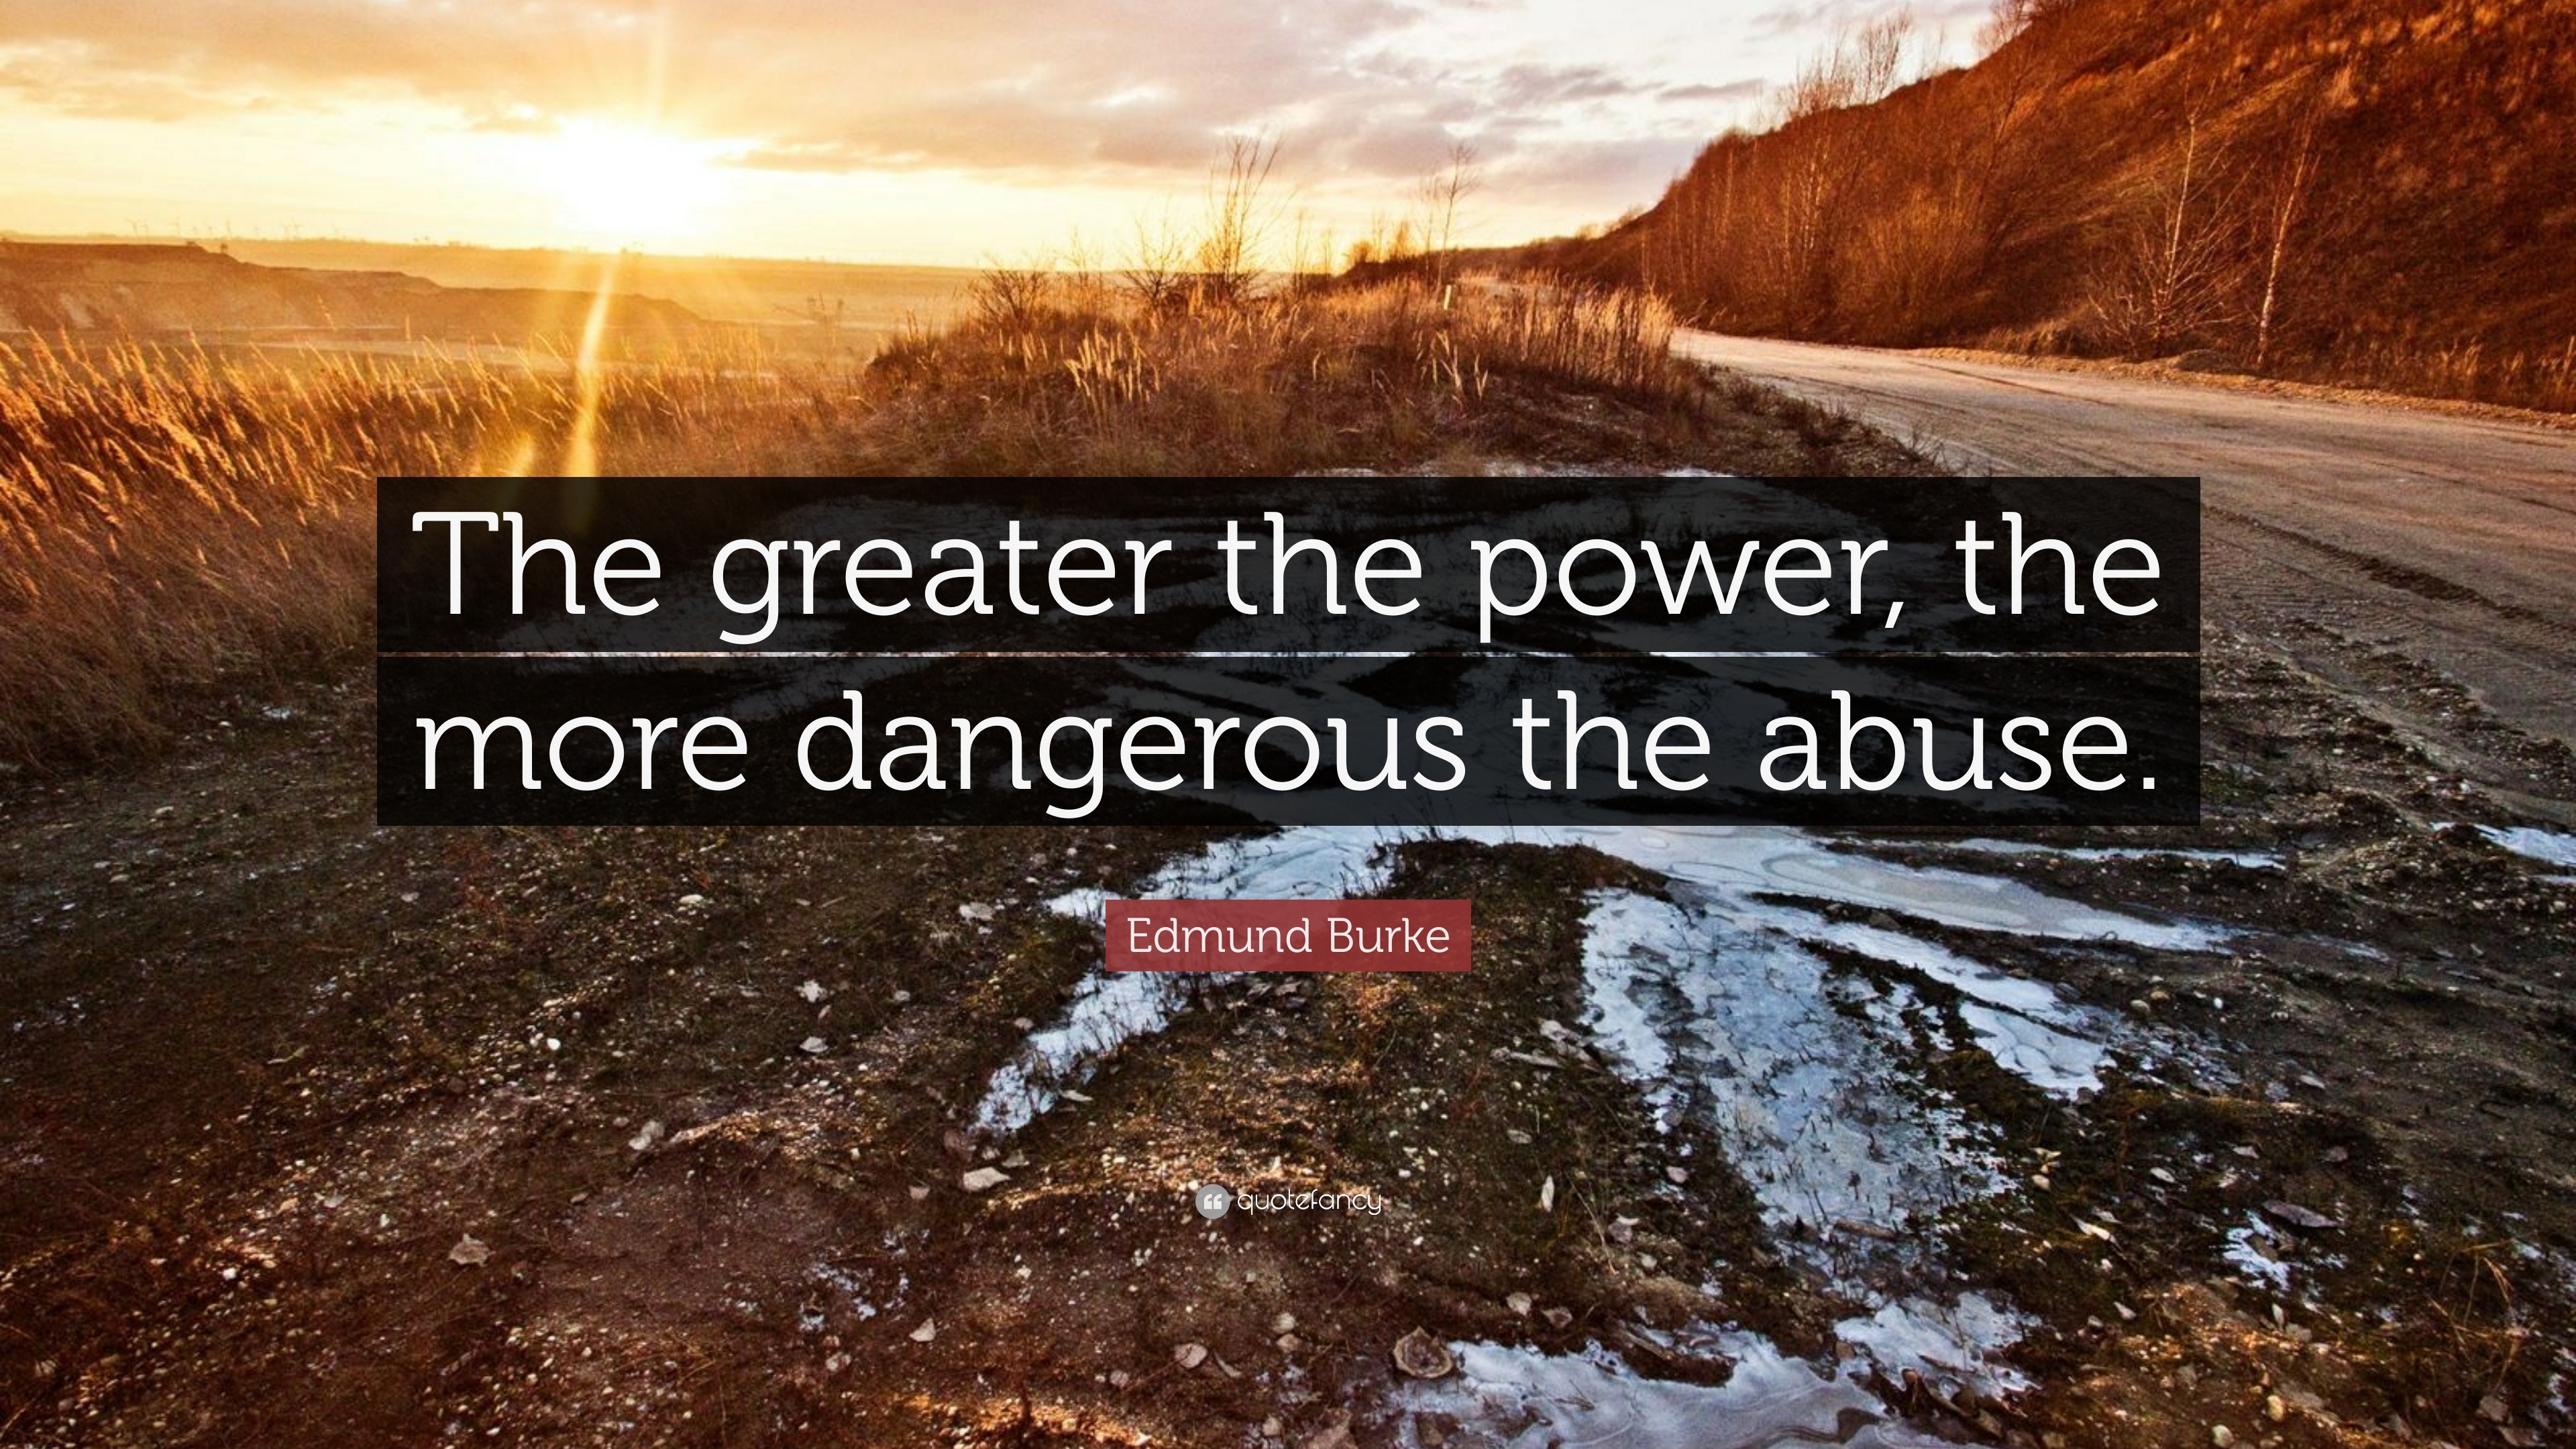 edmund burke quotes the greater the power